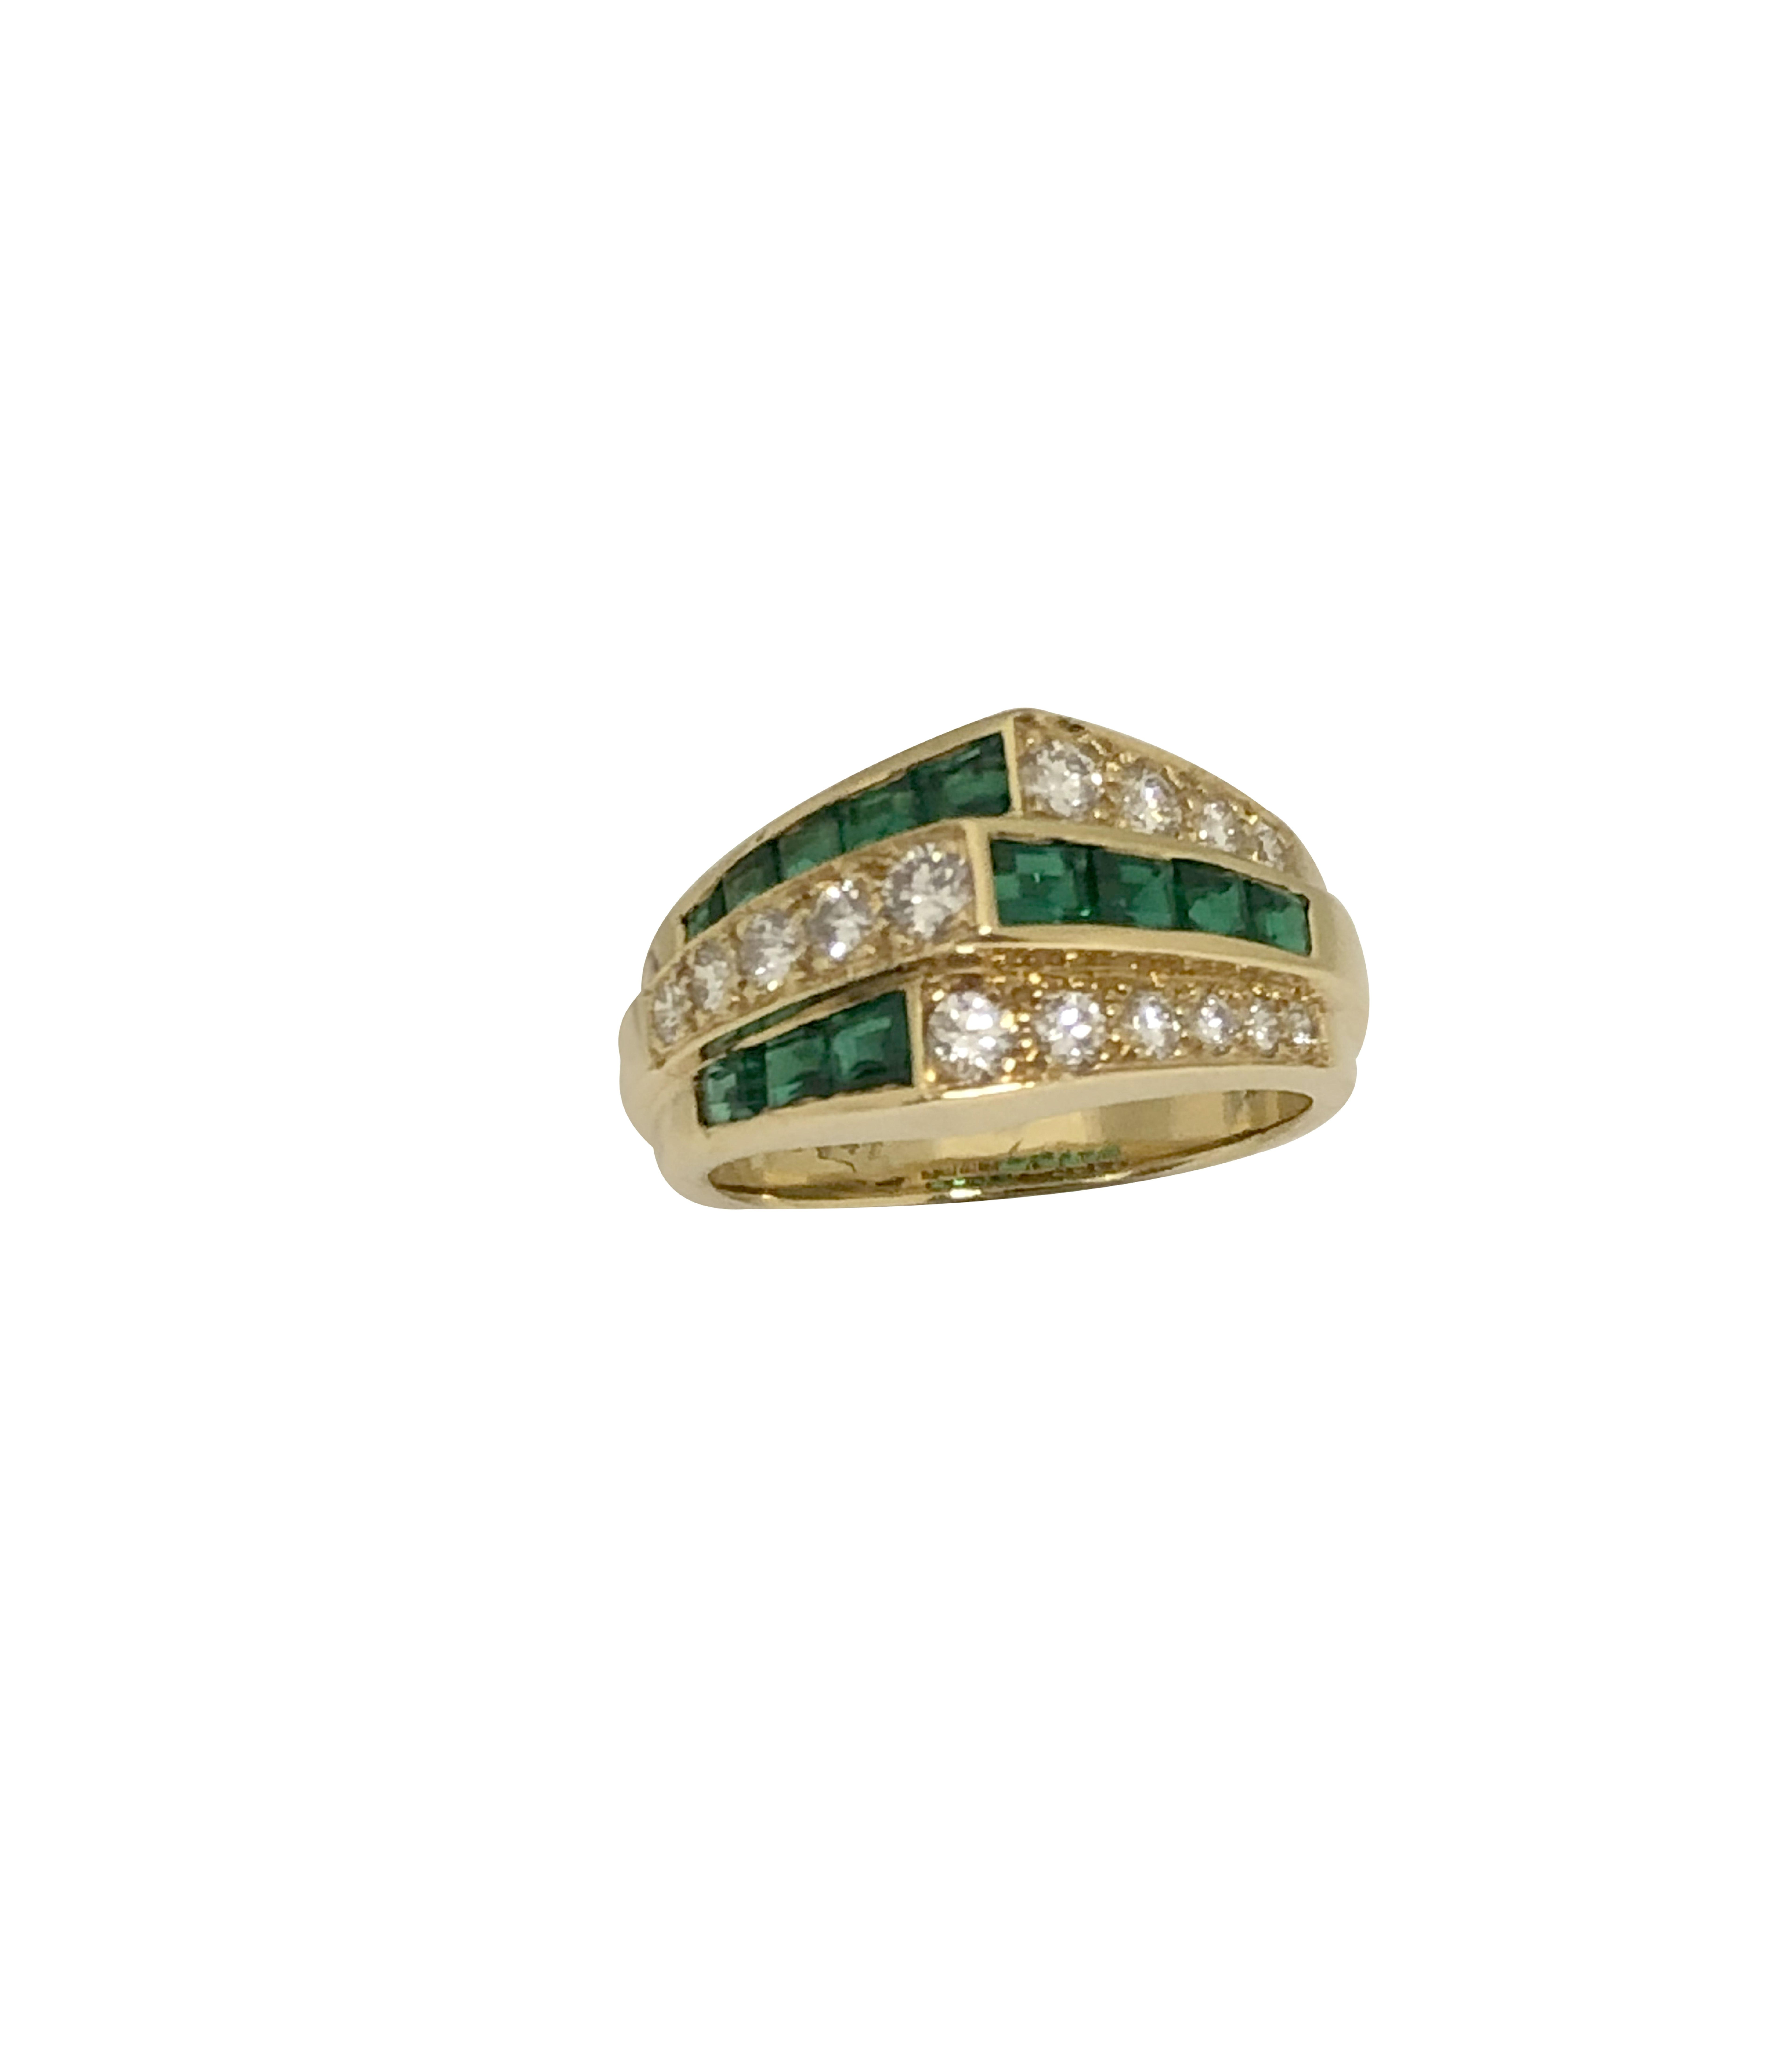 Circa 2000 Oscar Heyman 18K Yellow Gold Ring, set with alternating rows of Emeralds and Diamonds that come to a Peak at the top, the ring measures 3/4 X 3/8 inch across the top. Set with Extremely intense fine color Colombian step cut Emeralds